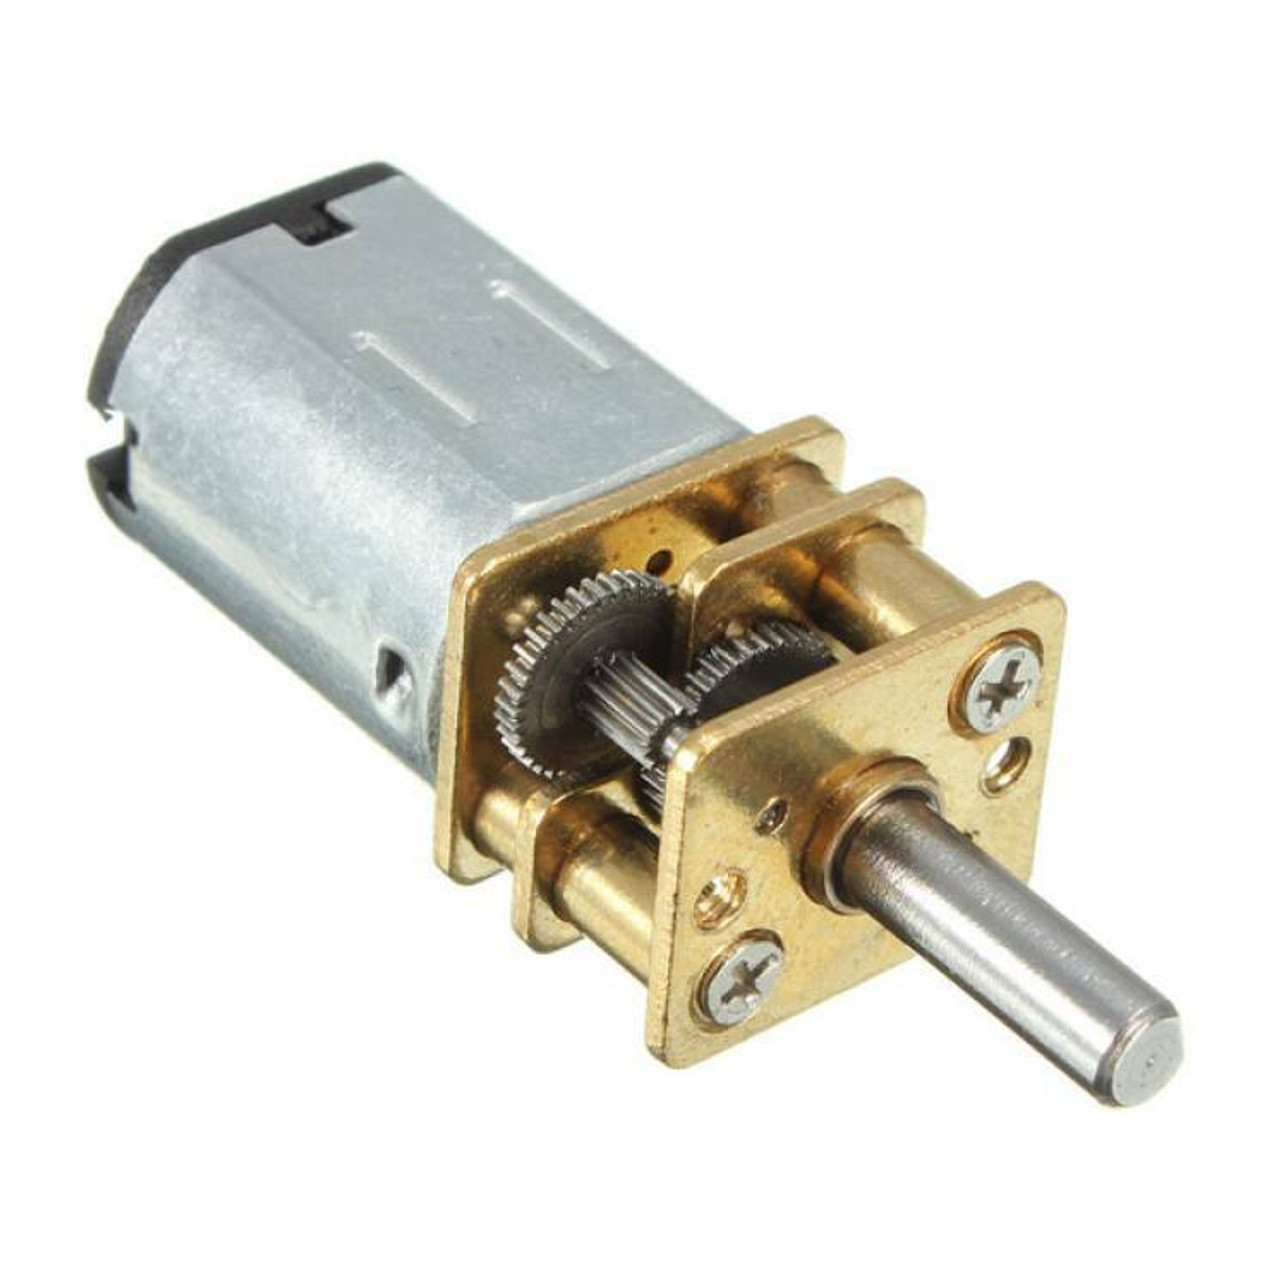 3-12v 100rpm DC N20 motor - Small Scale Lights